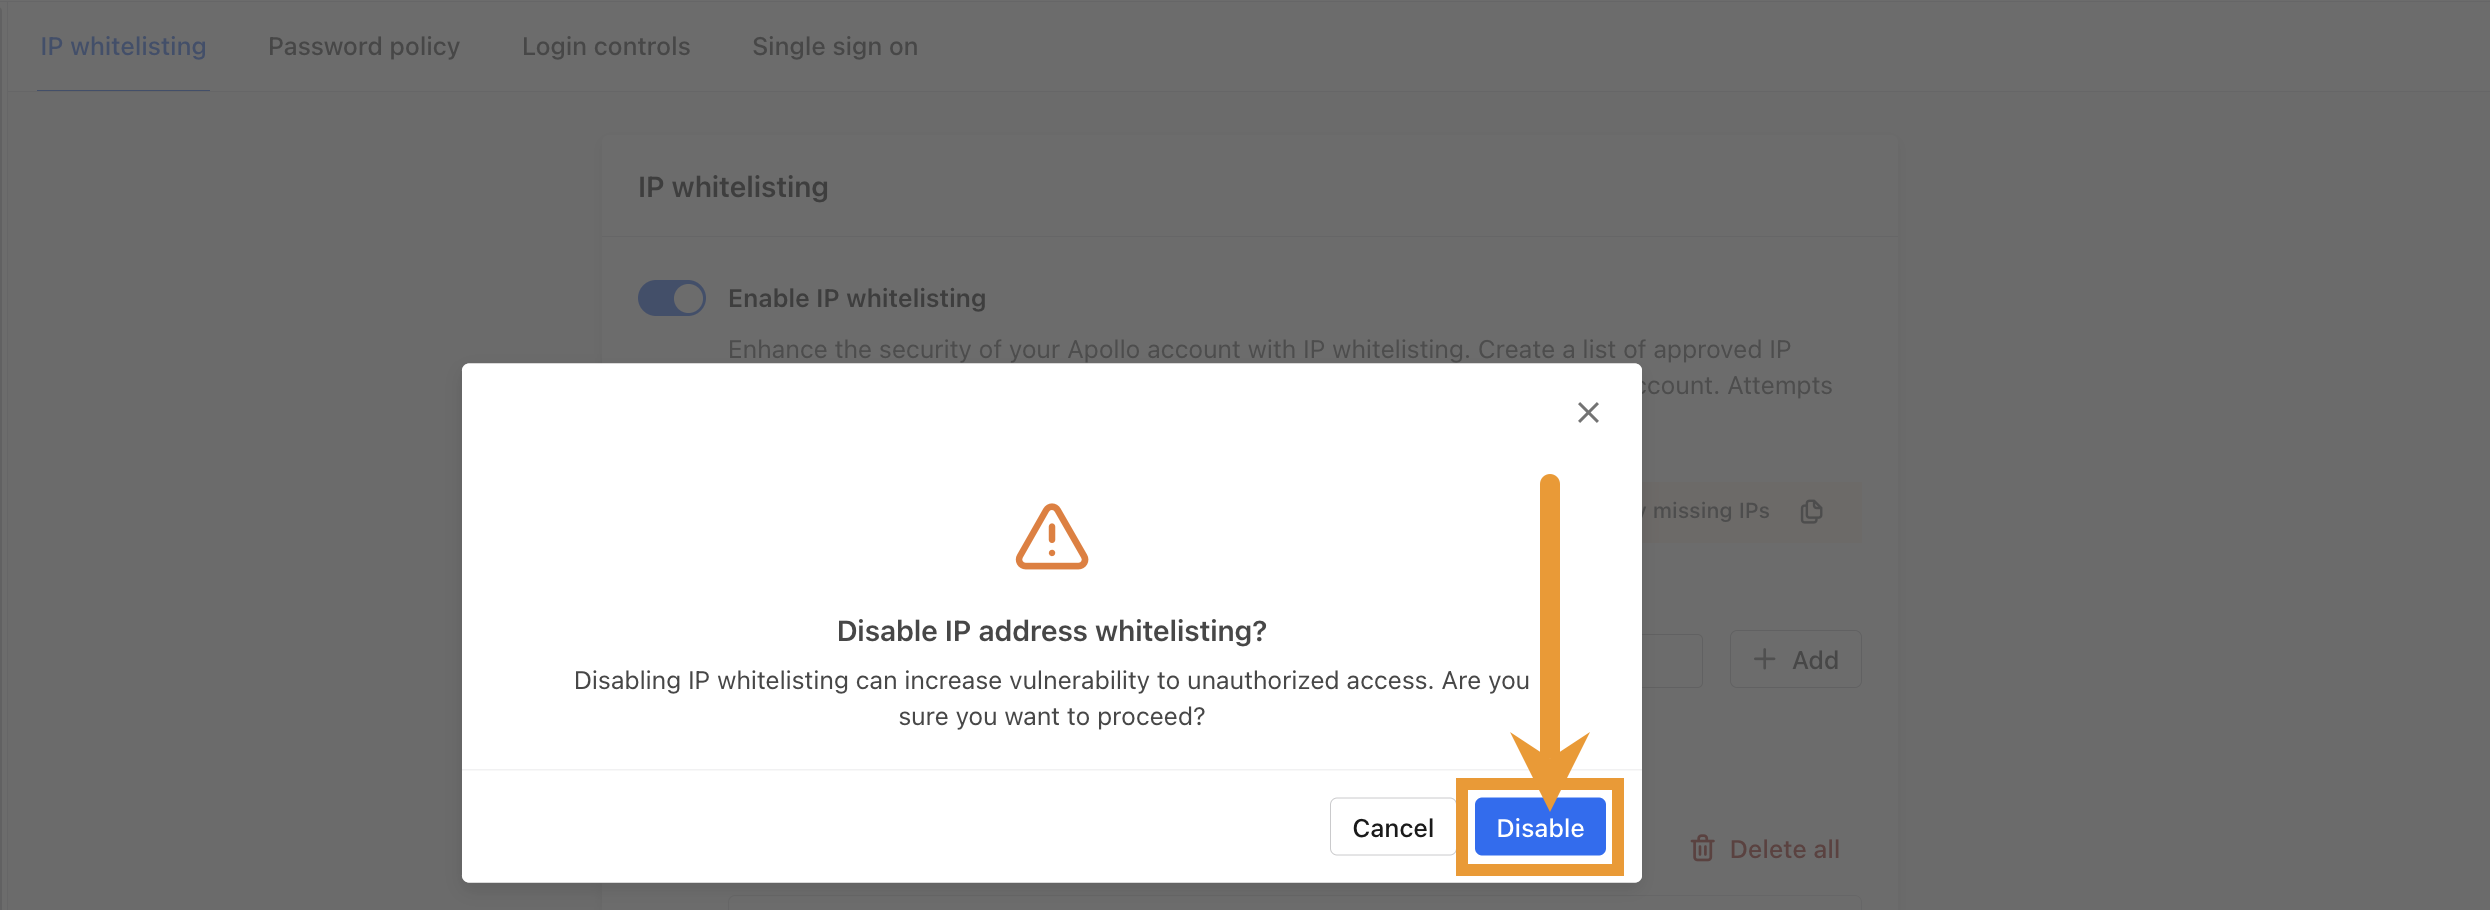 Disable button in warning modal